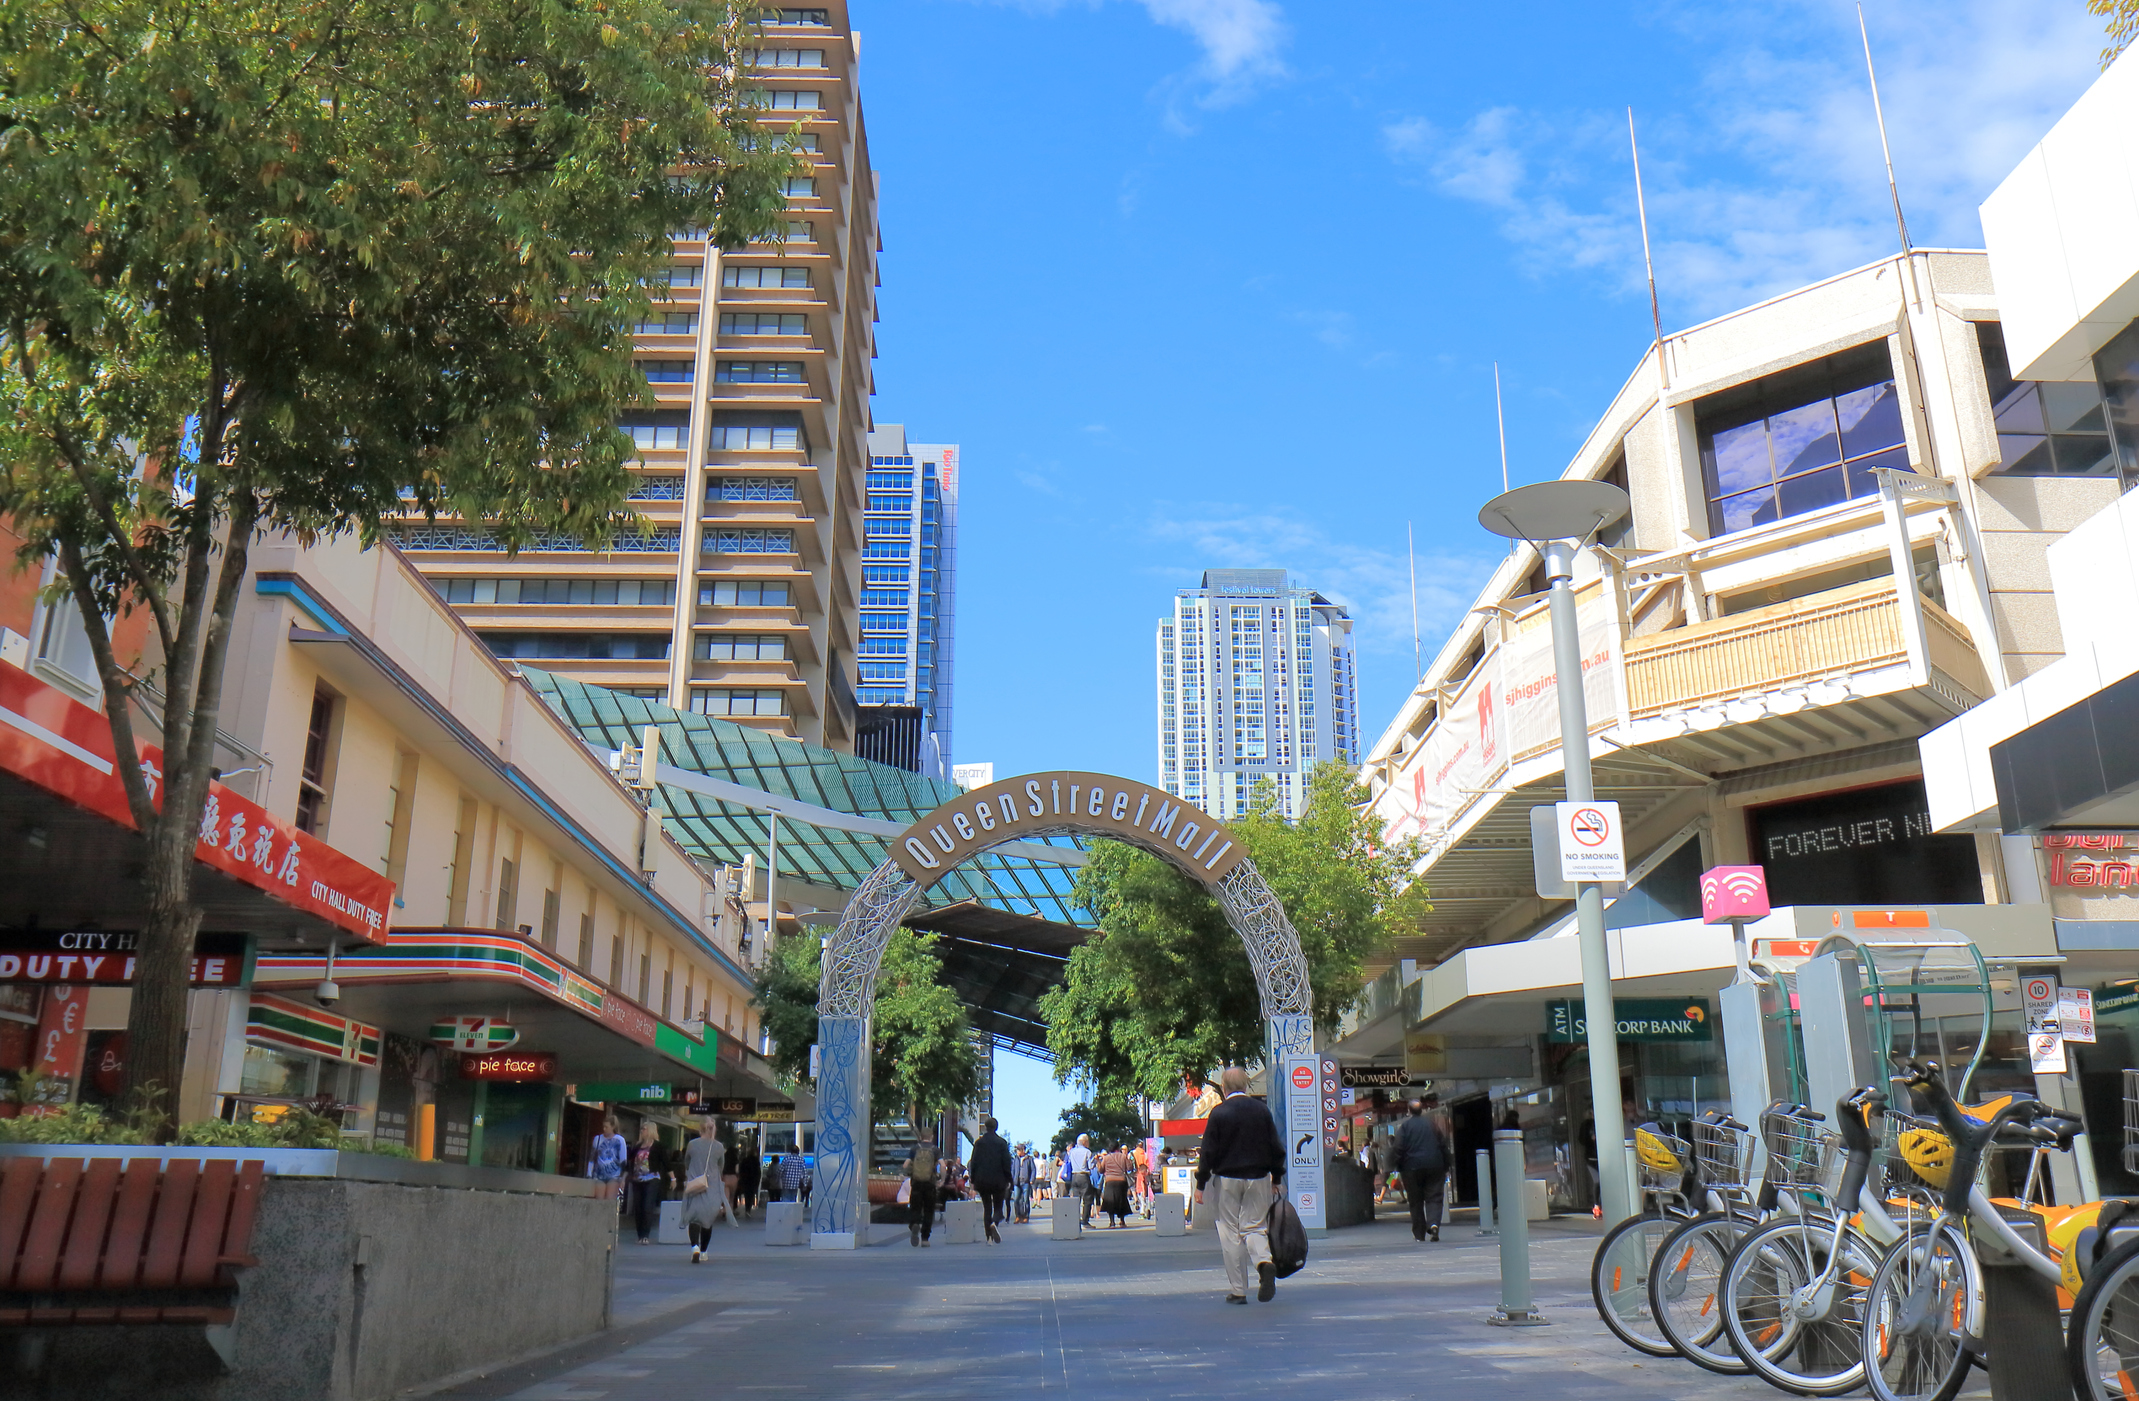 Lord Mayor ‘leads by example’ to revitalise Brisbane CBD ghost town